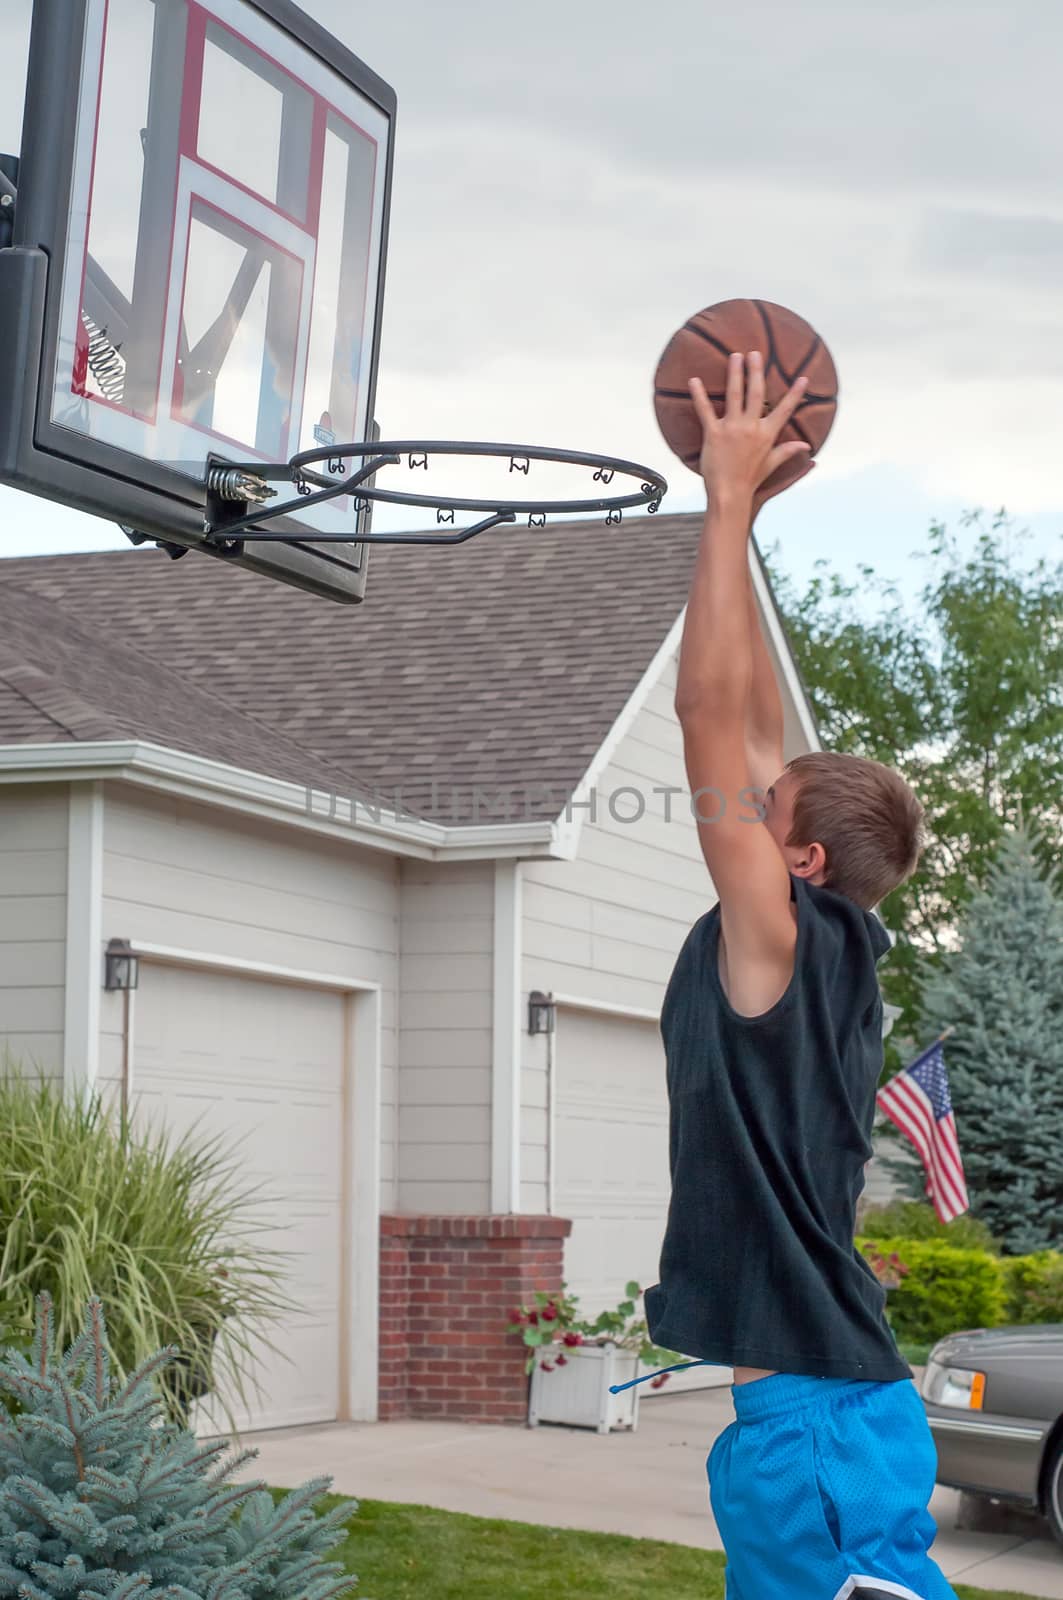 Teenage Boy Playing Basketball at Home by rcarner